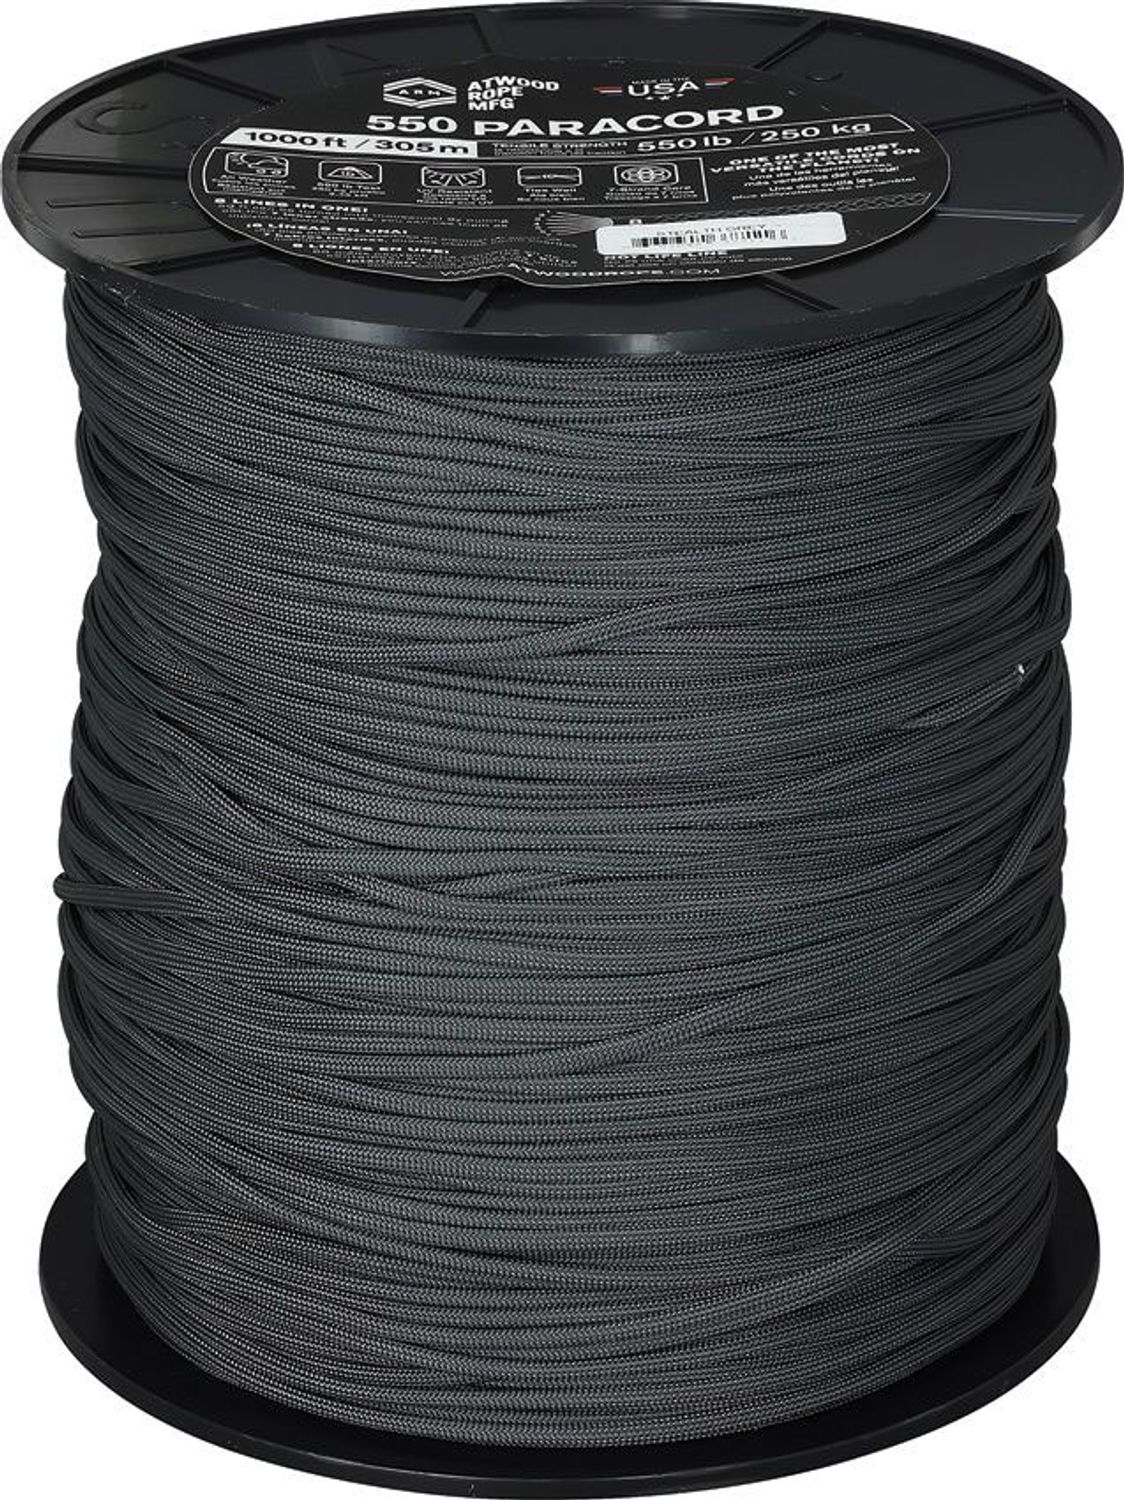 Atwood Rope 550 Paracord, Stealth Gray, 1000 Foot Spool - KnifeCenter -  RG143S